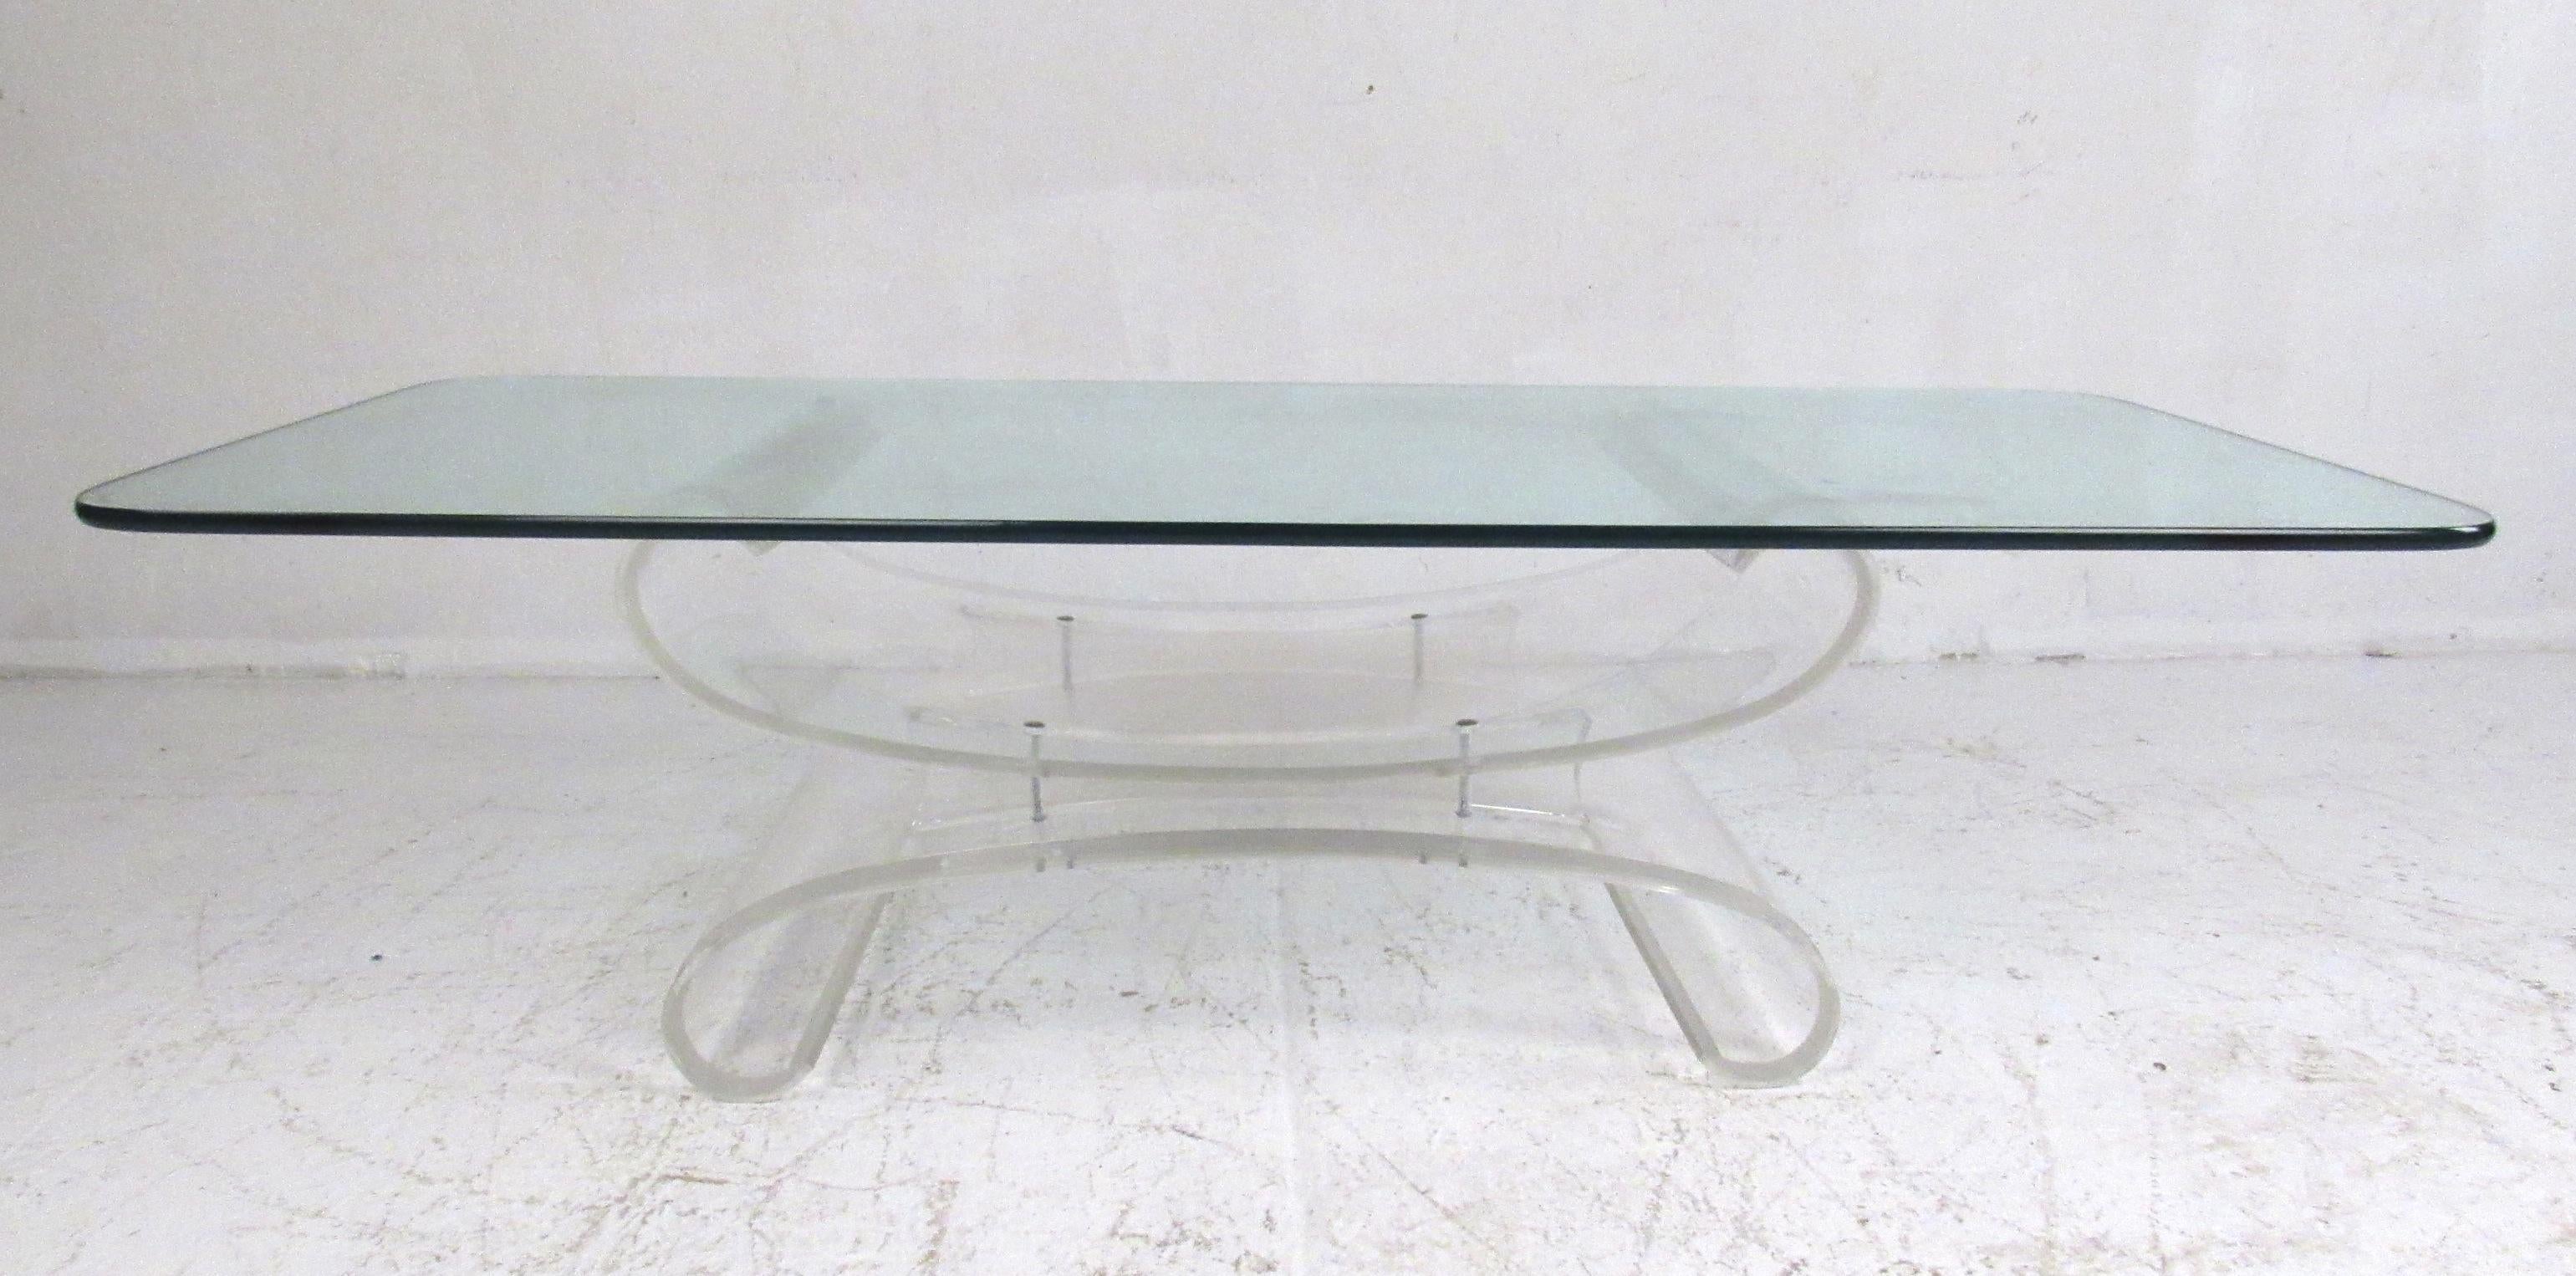 This beautiful vintage modern coffee table boasts an unusual sculpted Lucite base. A large rectangular piece of glass that is 3/4 inches thick sits comfortably on top. A butterfly shaped design with sides that curve inward show quality construction.